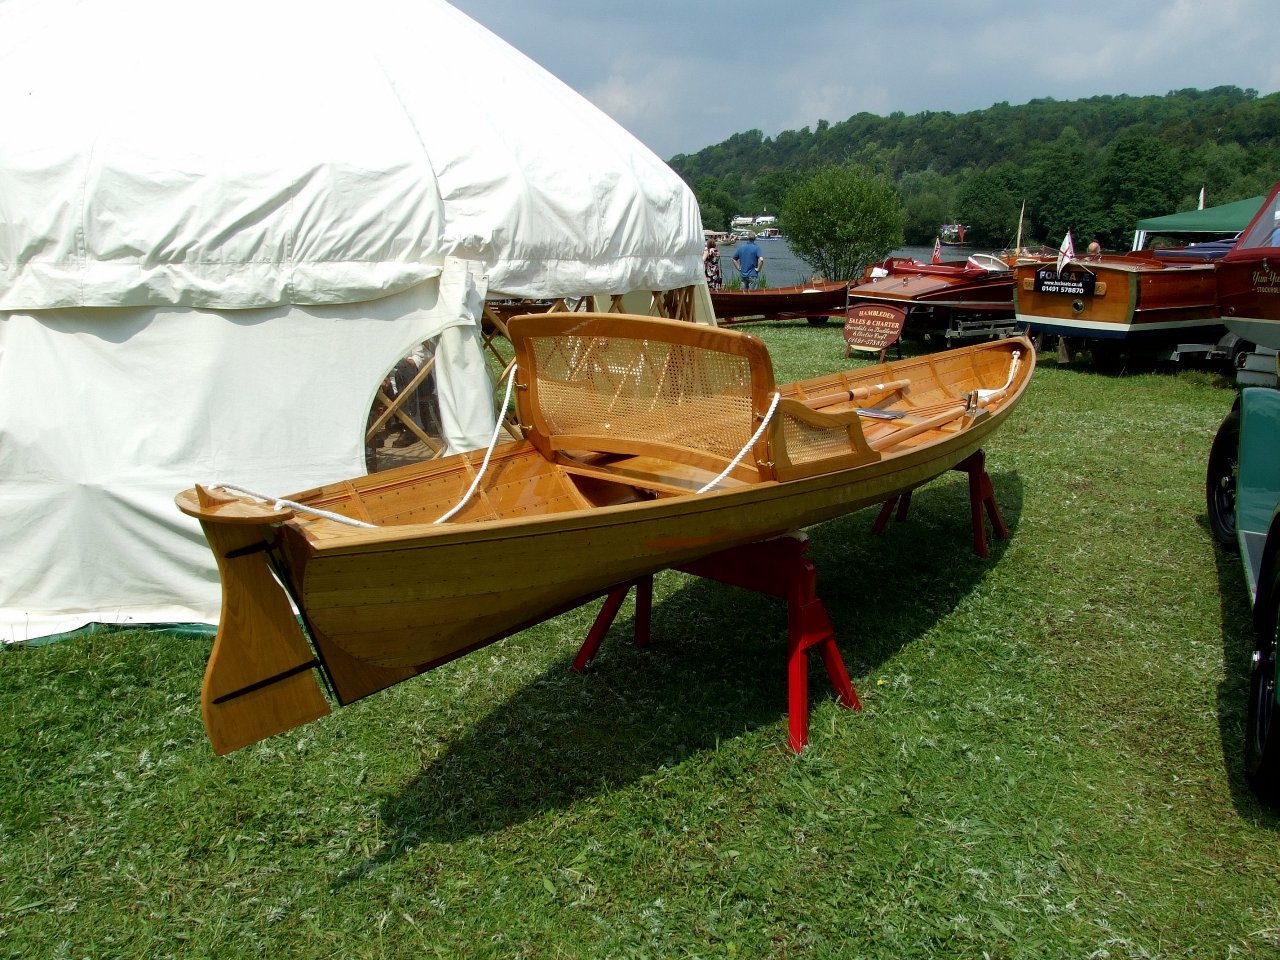  feast of rowing boats at the Beale Park Boat Show | intheboatshed.net